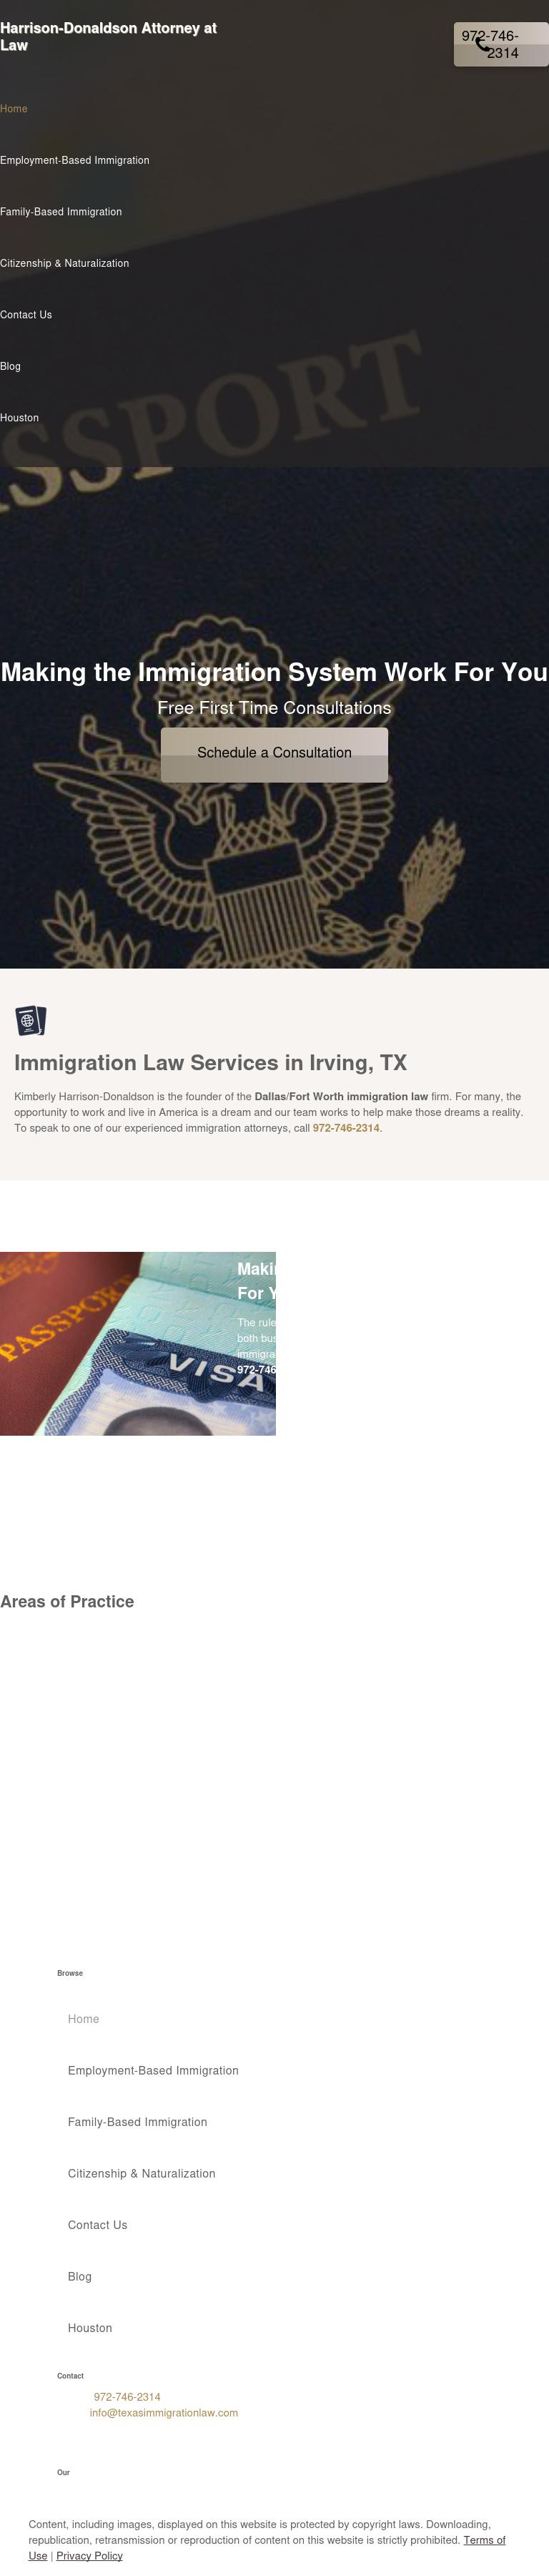 Harrison - Donaldson, Attorney at Law - Irving TX Lawyers